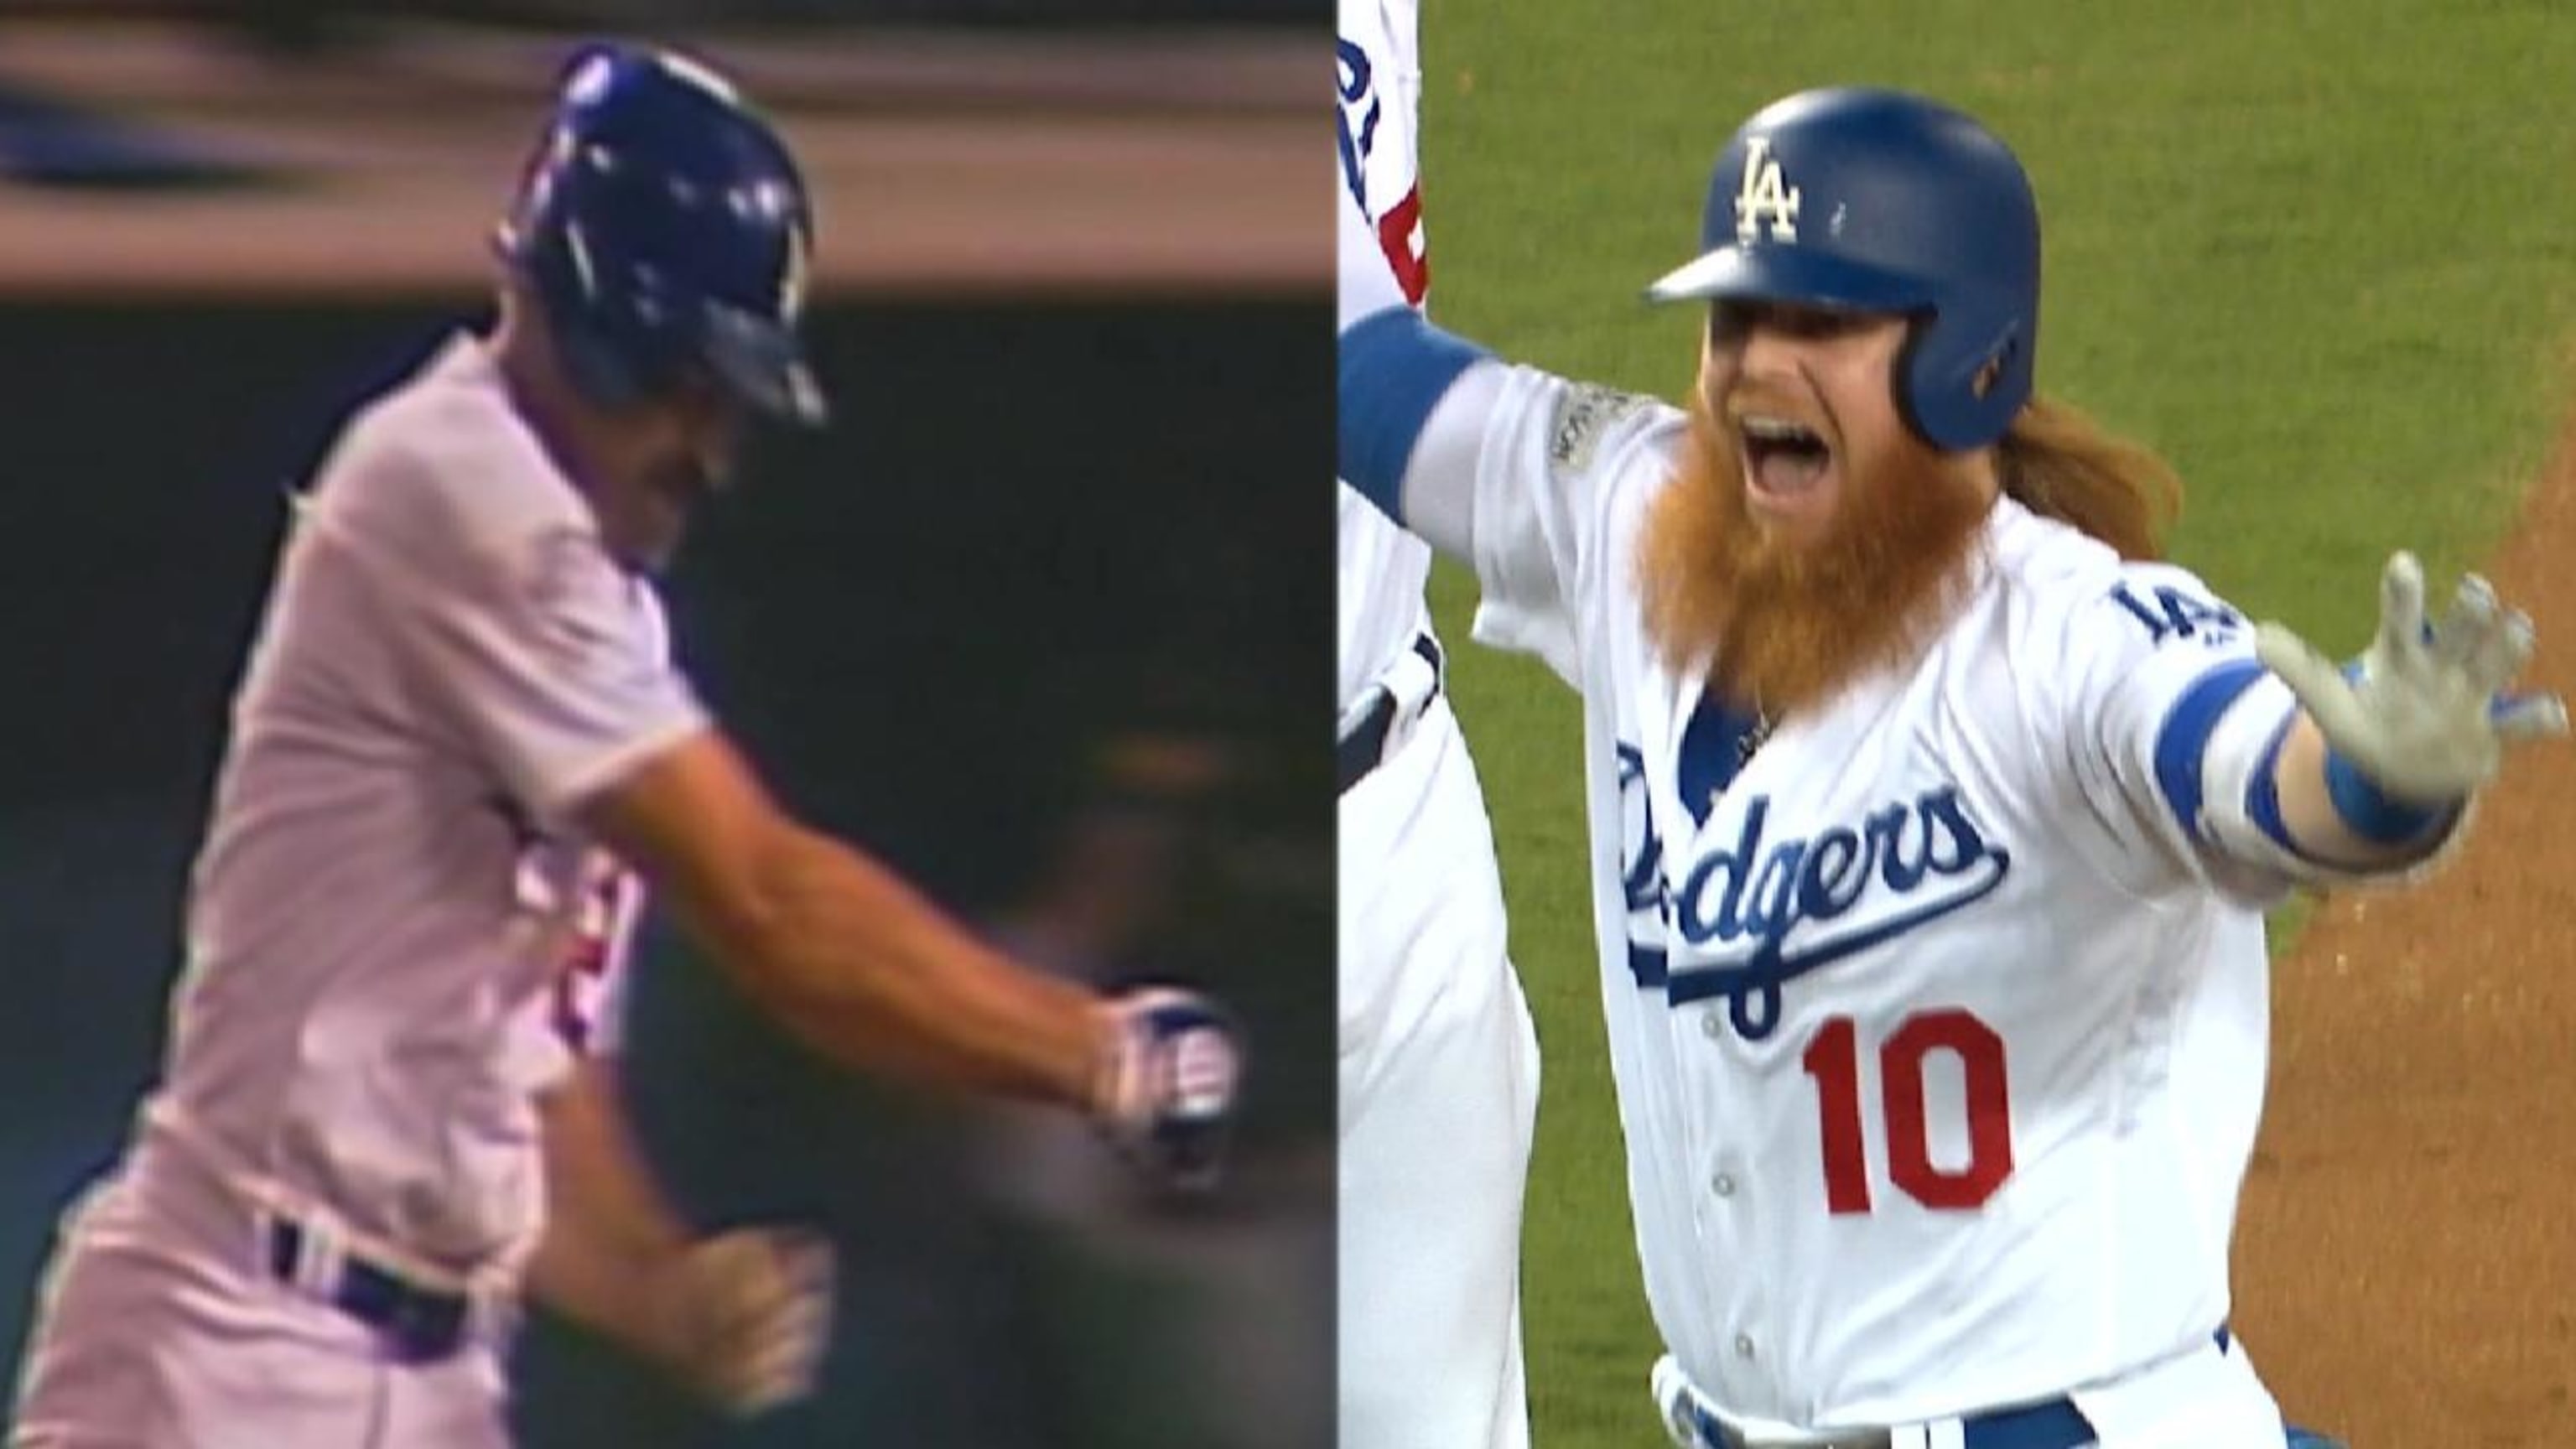 Exactly 29 years after Kirk Gibson, Justin Turner hit a postseason